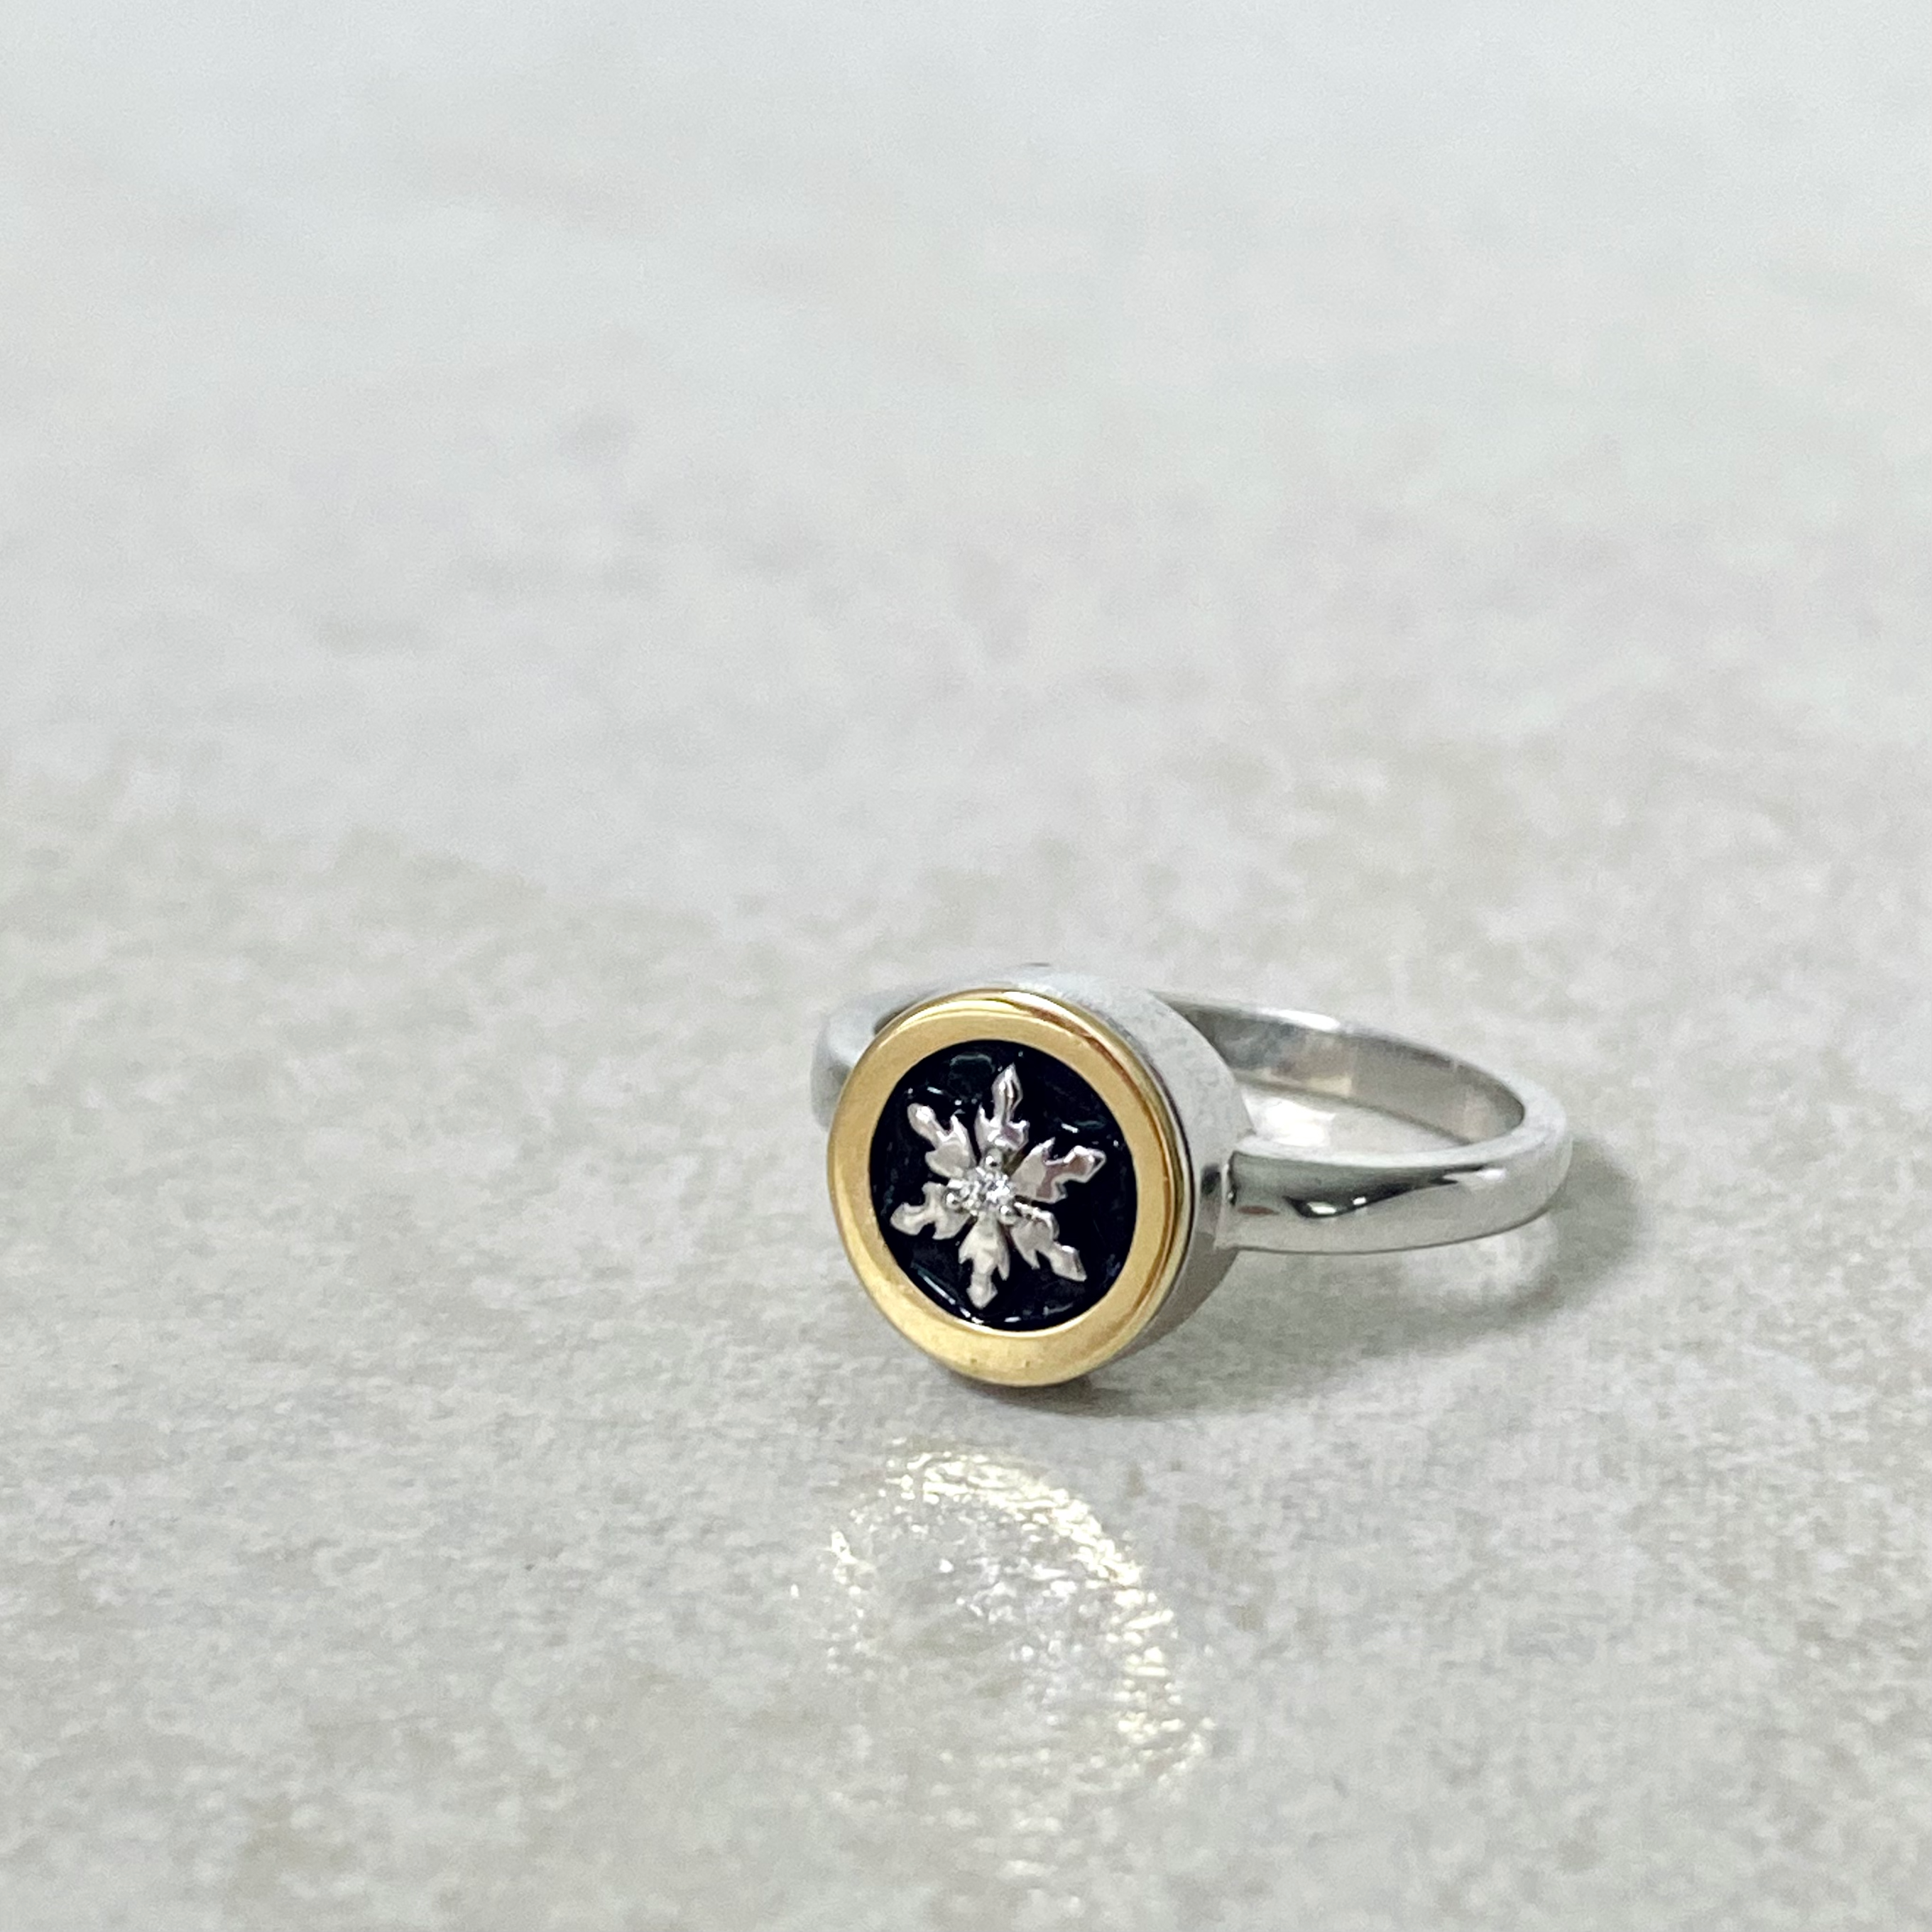 Snowflake Ring with Diamond Frosting